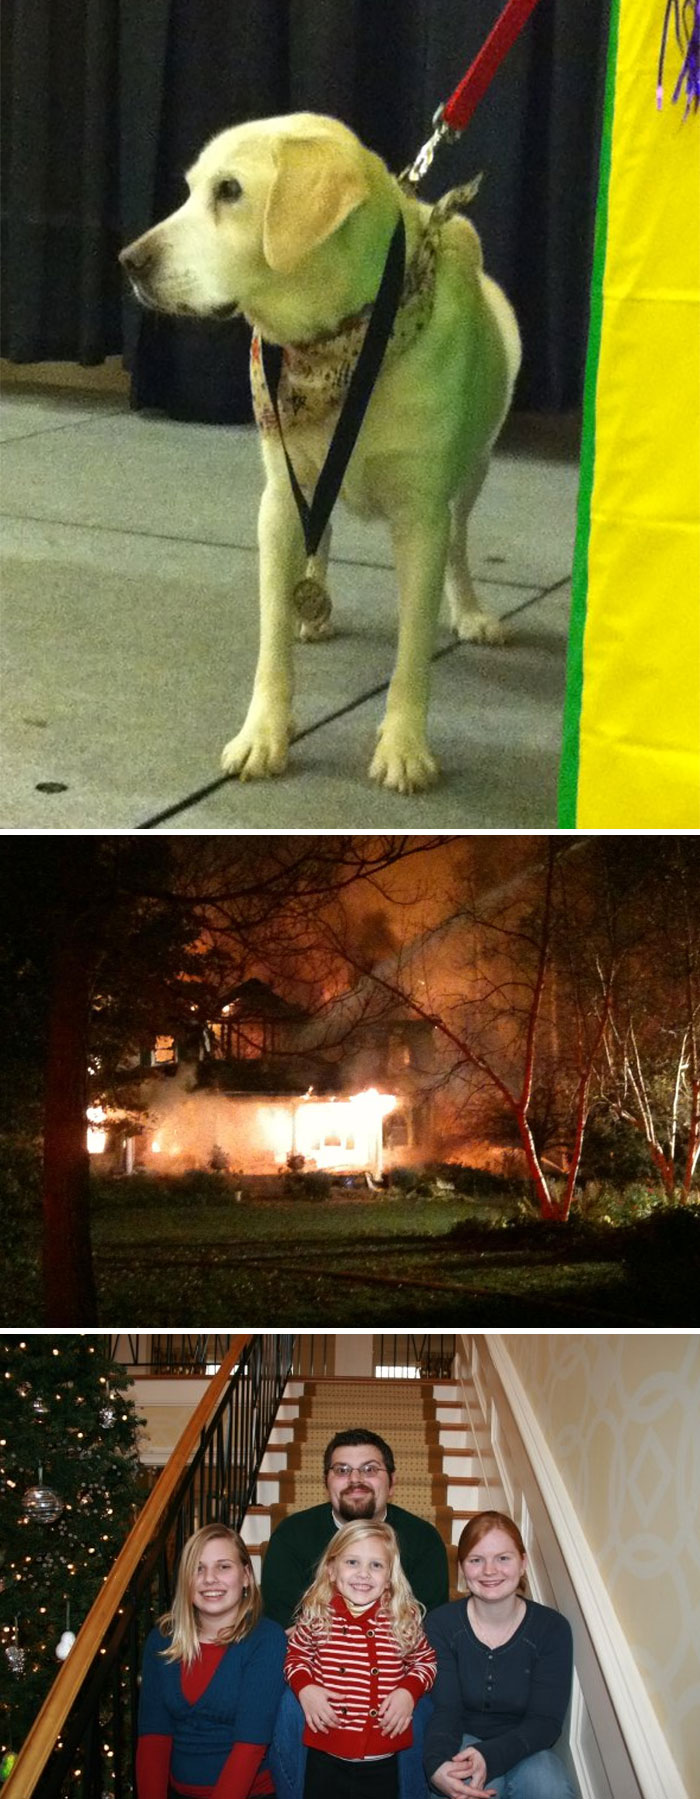 Our Blind Dog Molly Saved The Lives Of 7 People, 2 Dogs, And 4 Cats From Fire